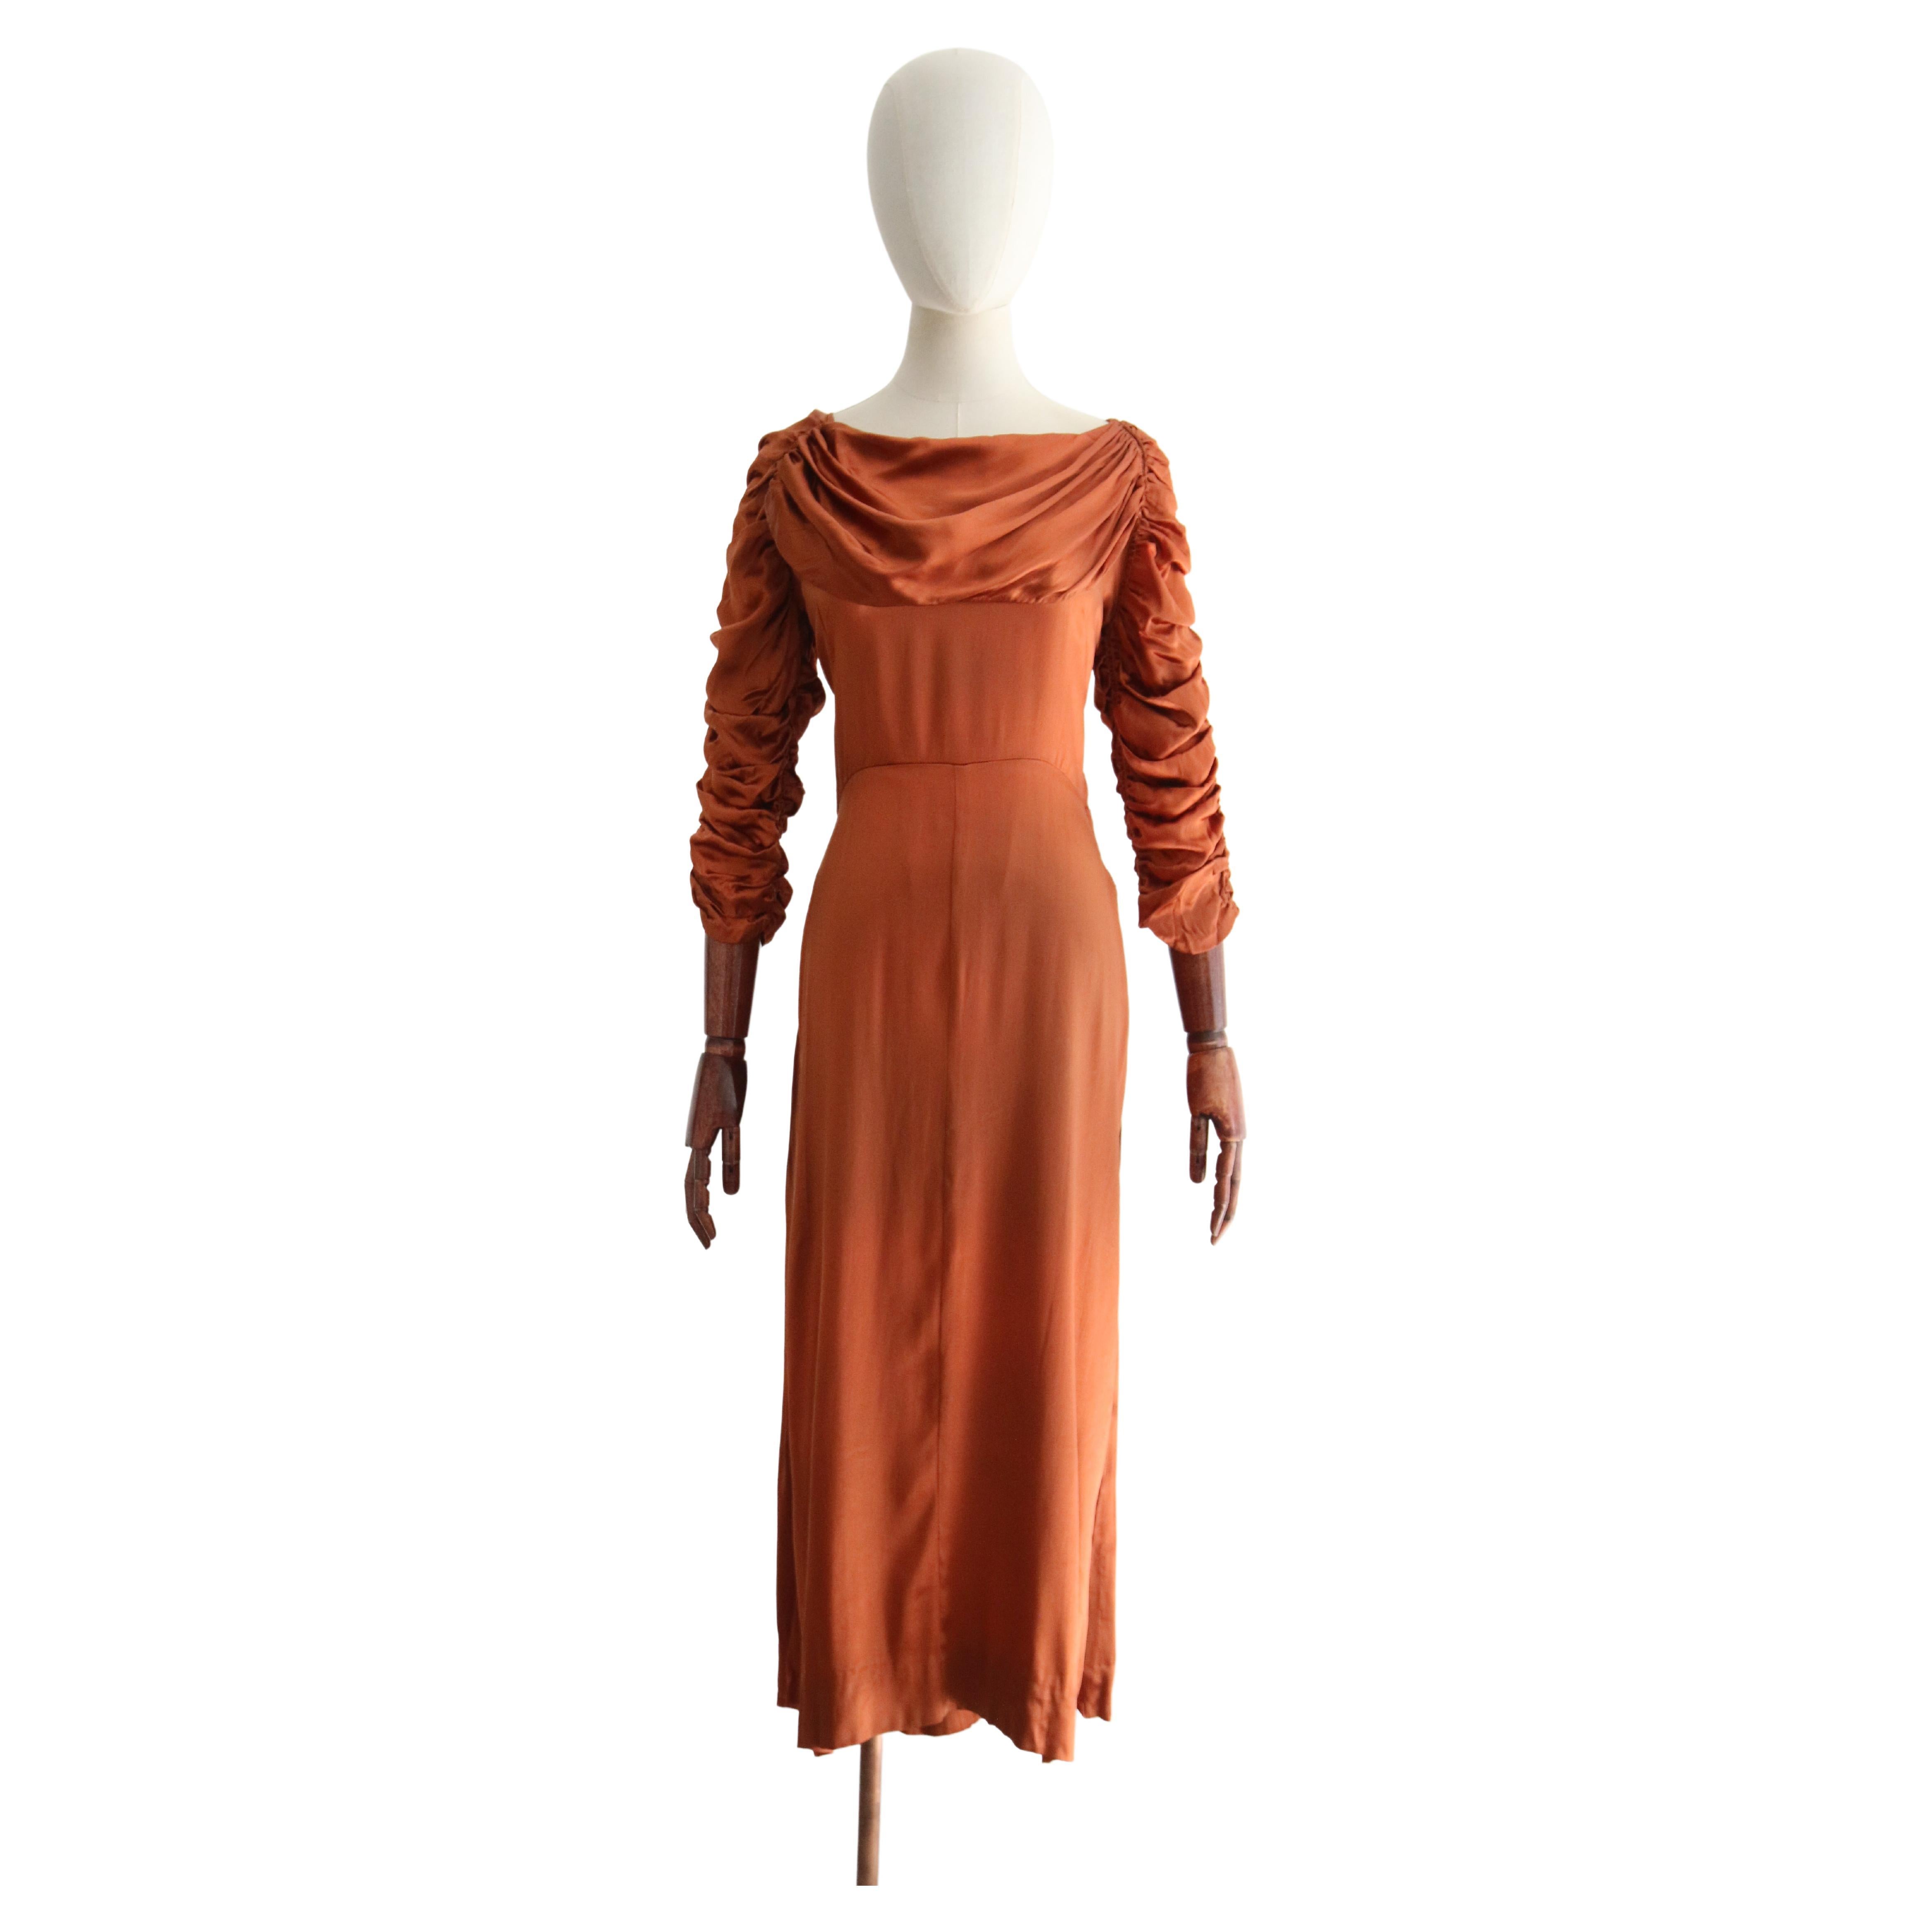 Vintage 1930's Pleated & Ruched Amber Satin Dress UK 10 US 6 For Sale